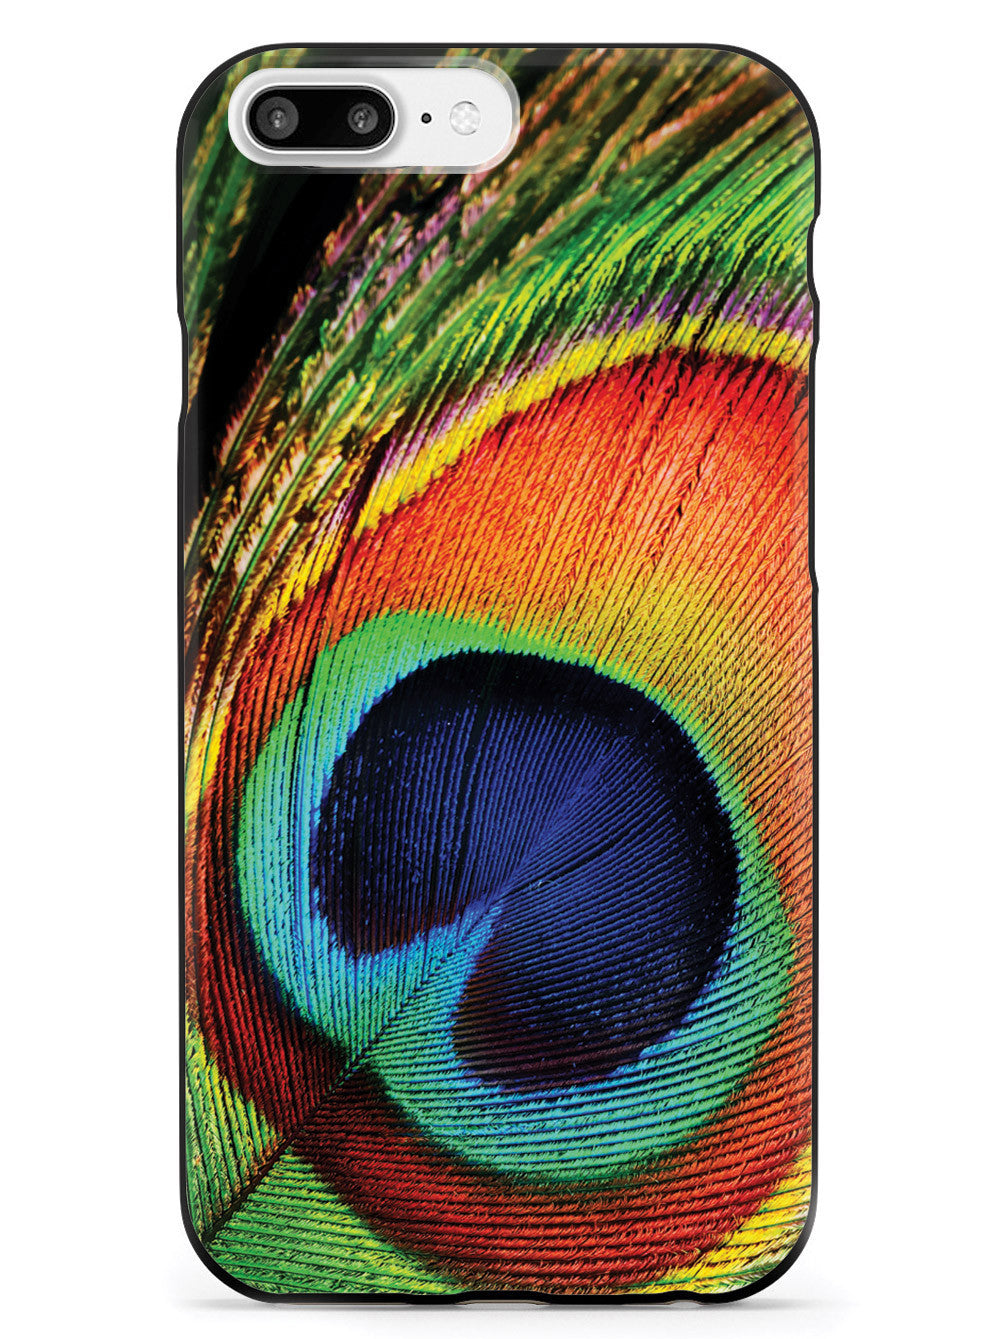 Textured Peacock Feather Case